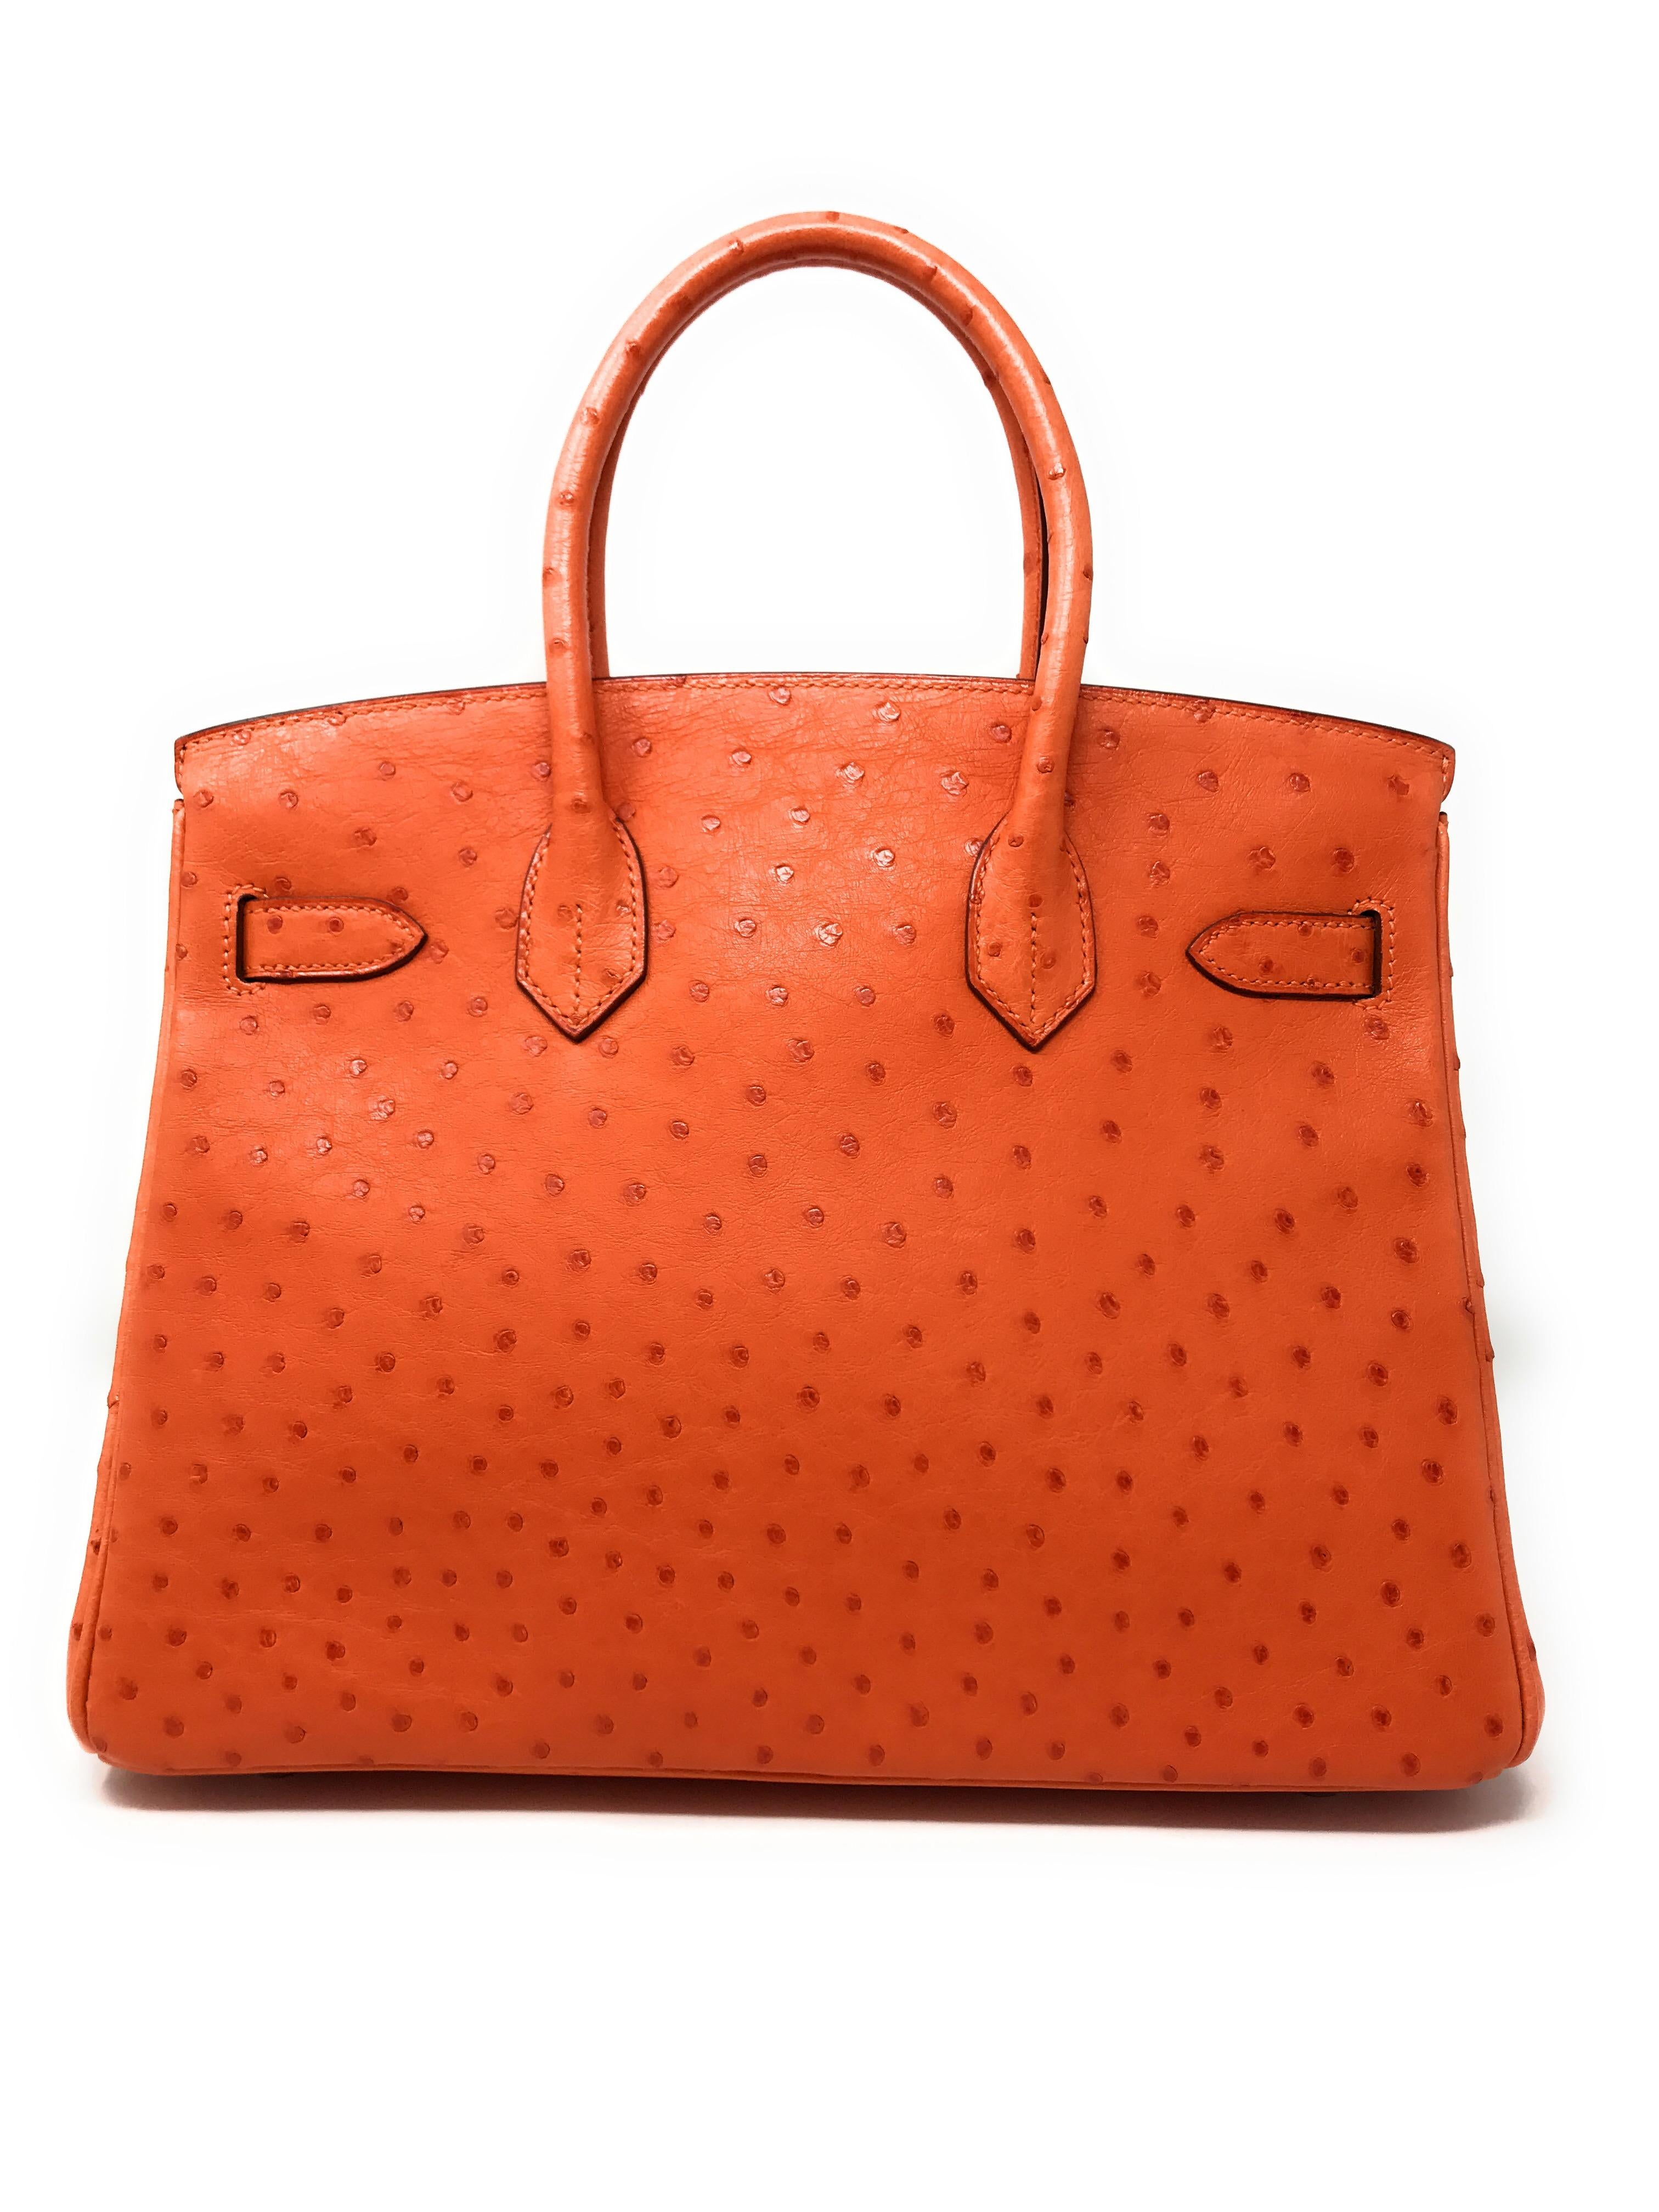 Bright and fresh Hermes Tangerine Orange! This compact size Birkin bag is a must have for any collector. It’s the 30cm size which makes it versatile to enjoy day or night. This bag is crafted in the Hermes signature color in ostrich skin, that was